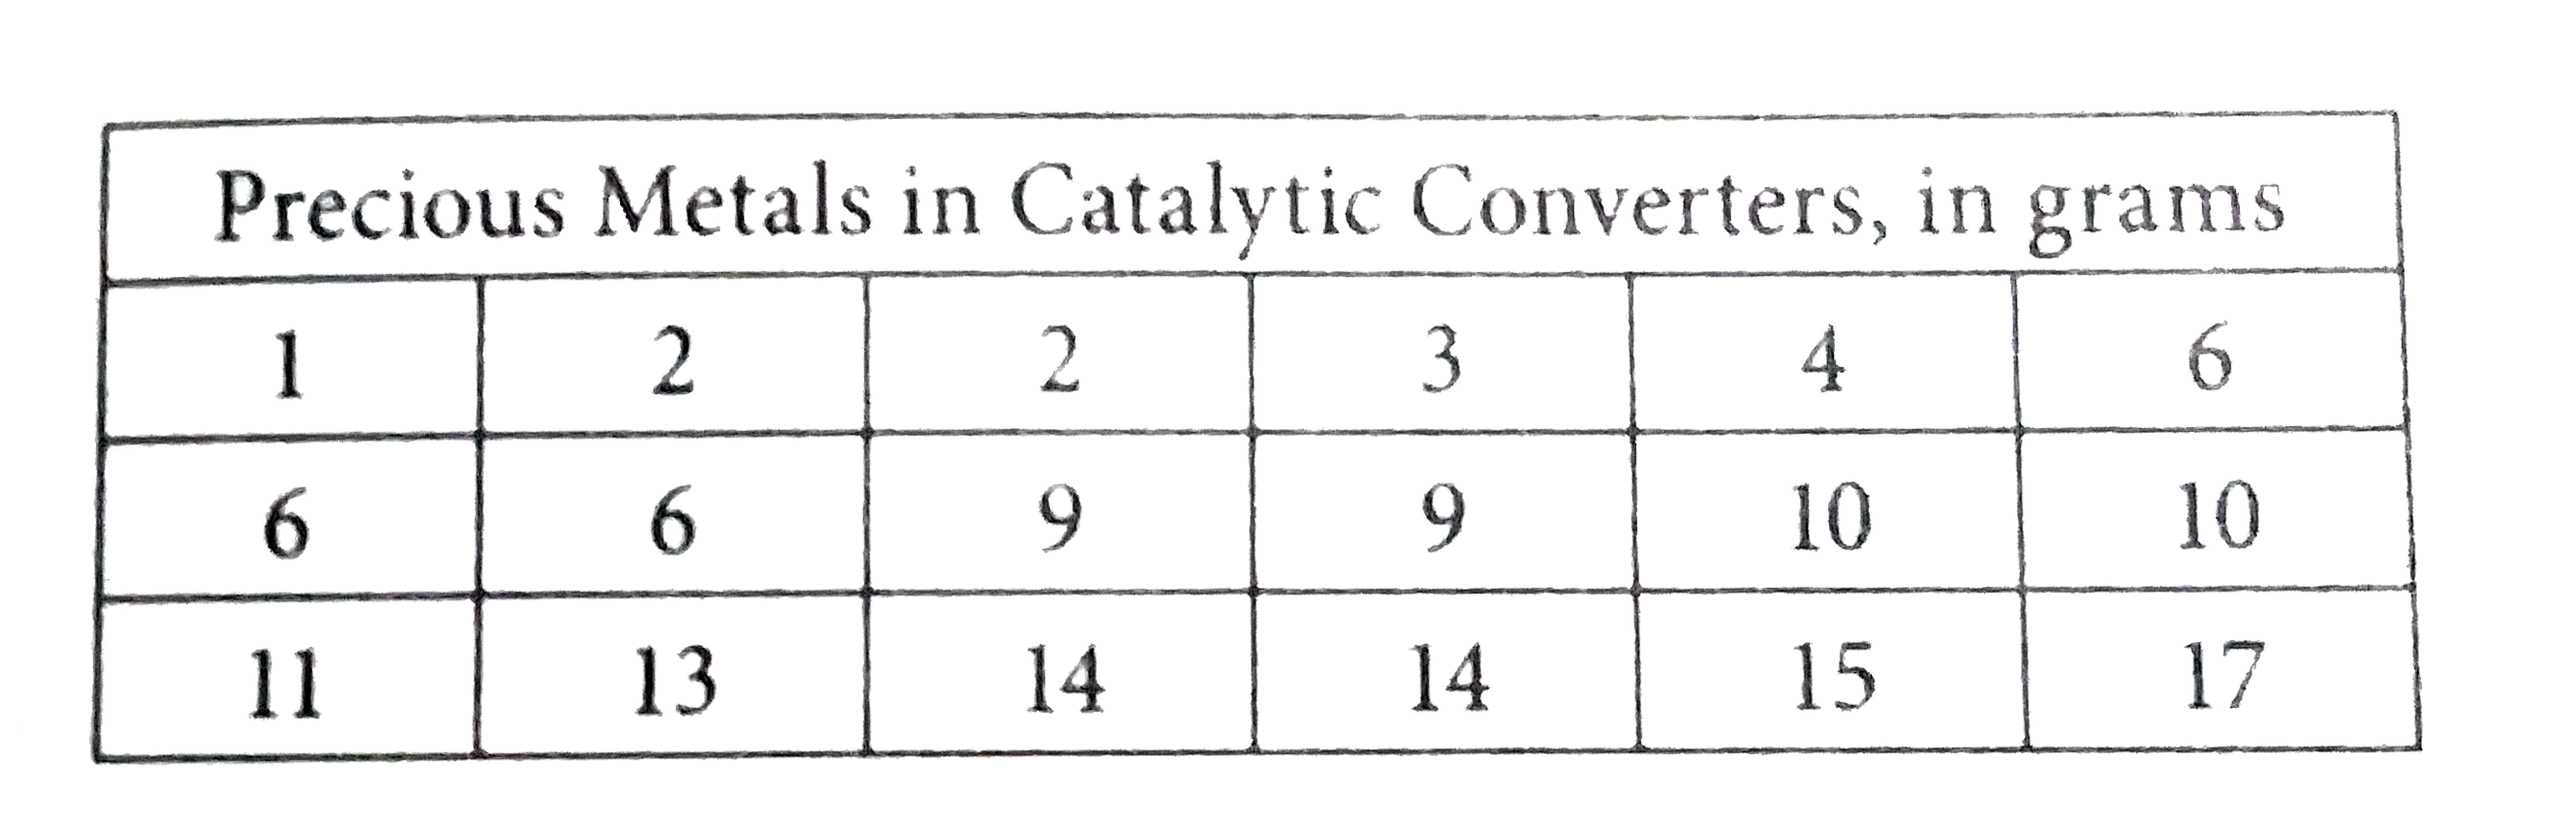 The grams of precious metals is recycled catalytic converters were measured for a variety of automobiles. The data is presented in the table above. If the lowest data point,1gram, and highest data points , 17 grams,are removed from the set, which of the following quantities would change the most?